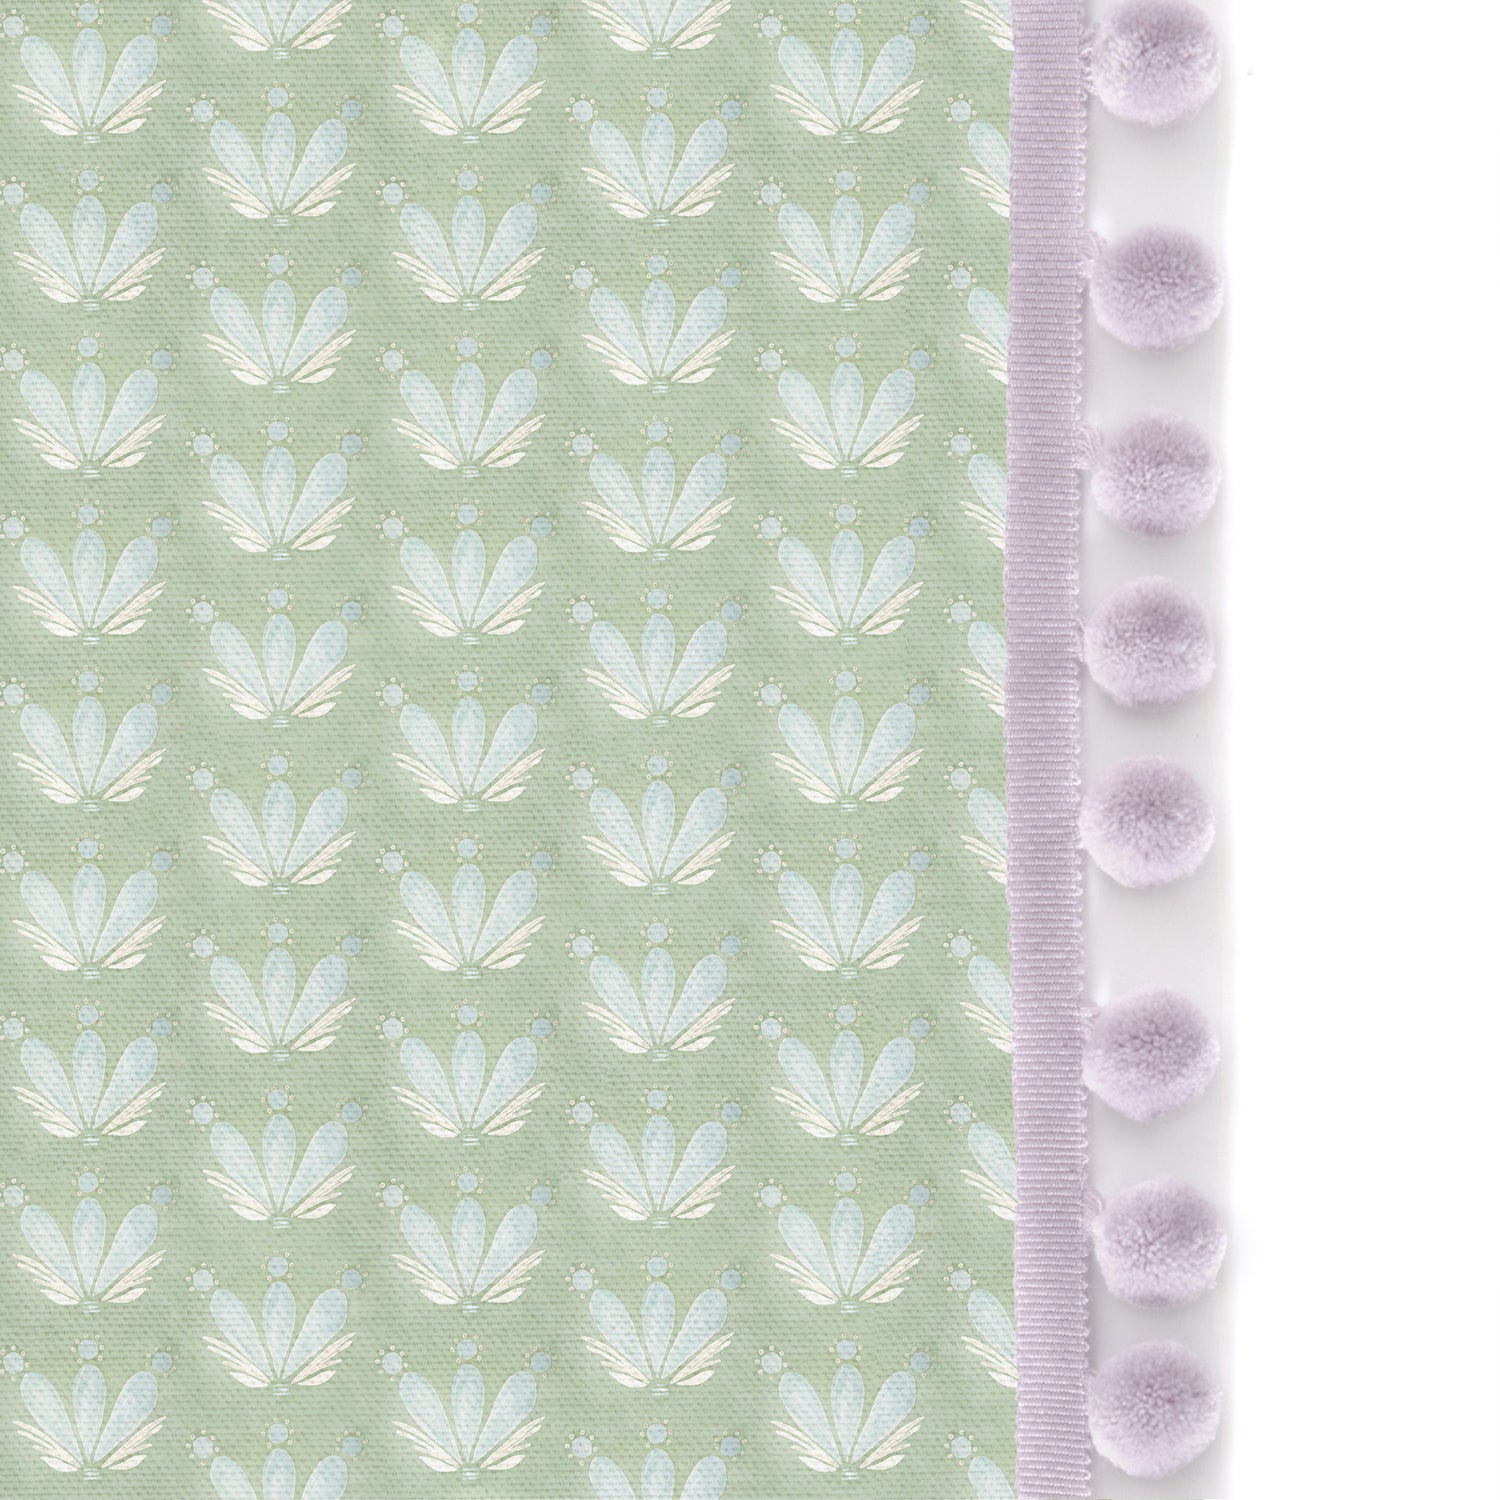 Upclose picture of Serena Sea Salt custom Coastal Inspired Green and Blueshower curtain with lilac pom pom trim